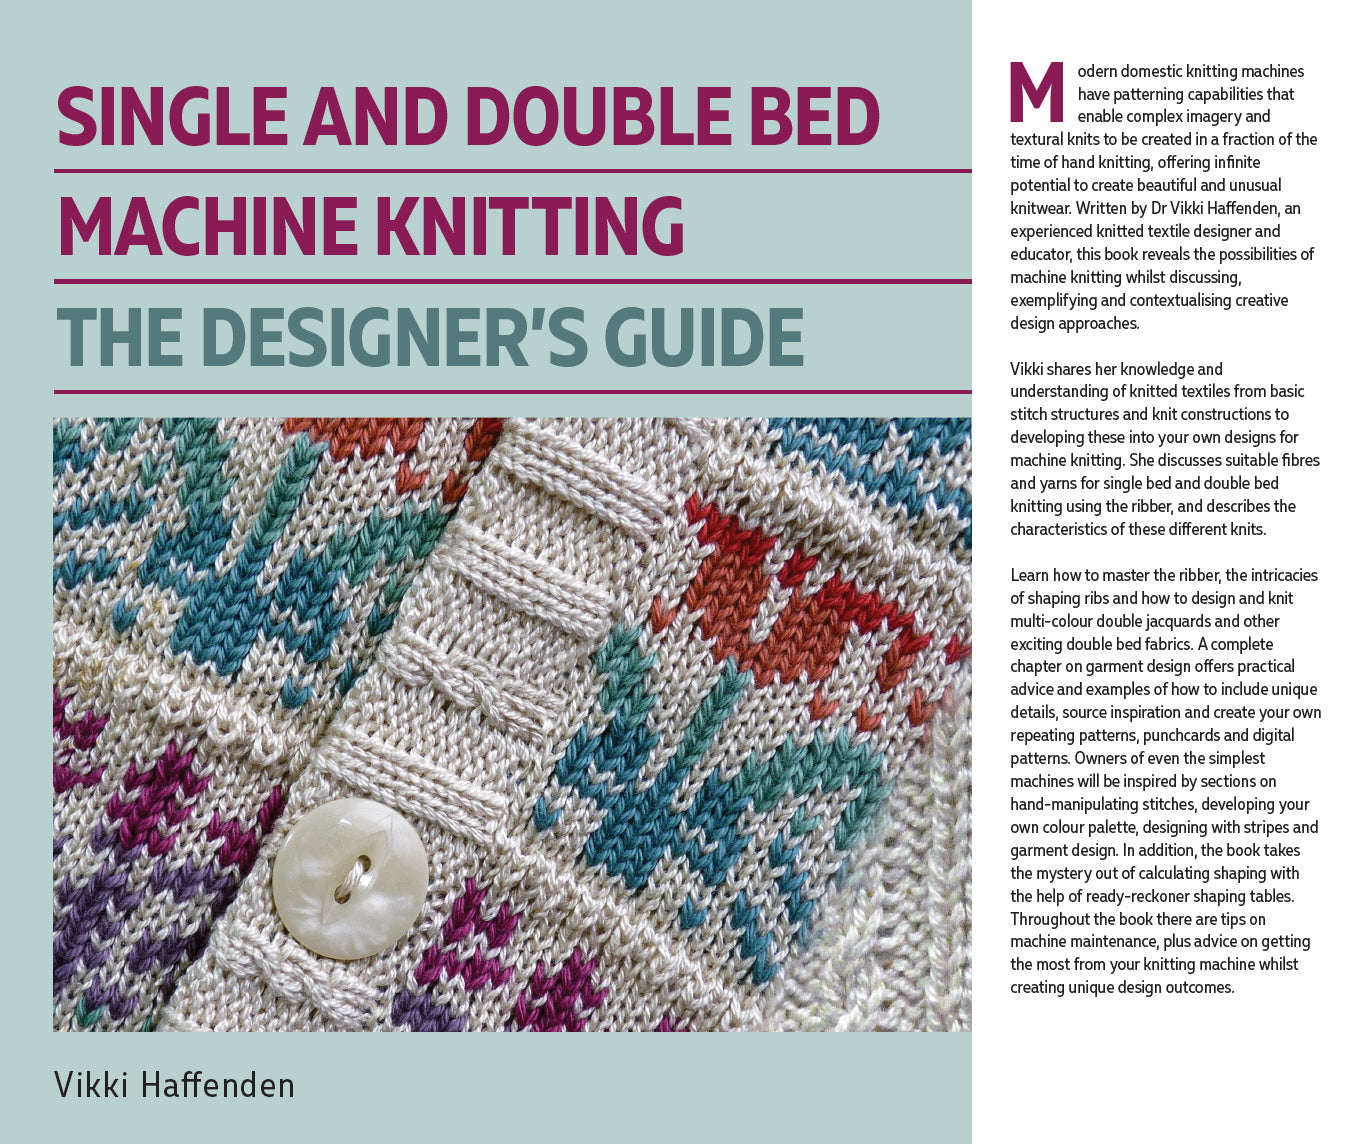 Single and Double Bed Machine Knitting - The Crowood Press